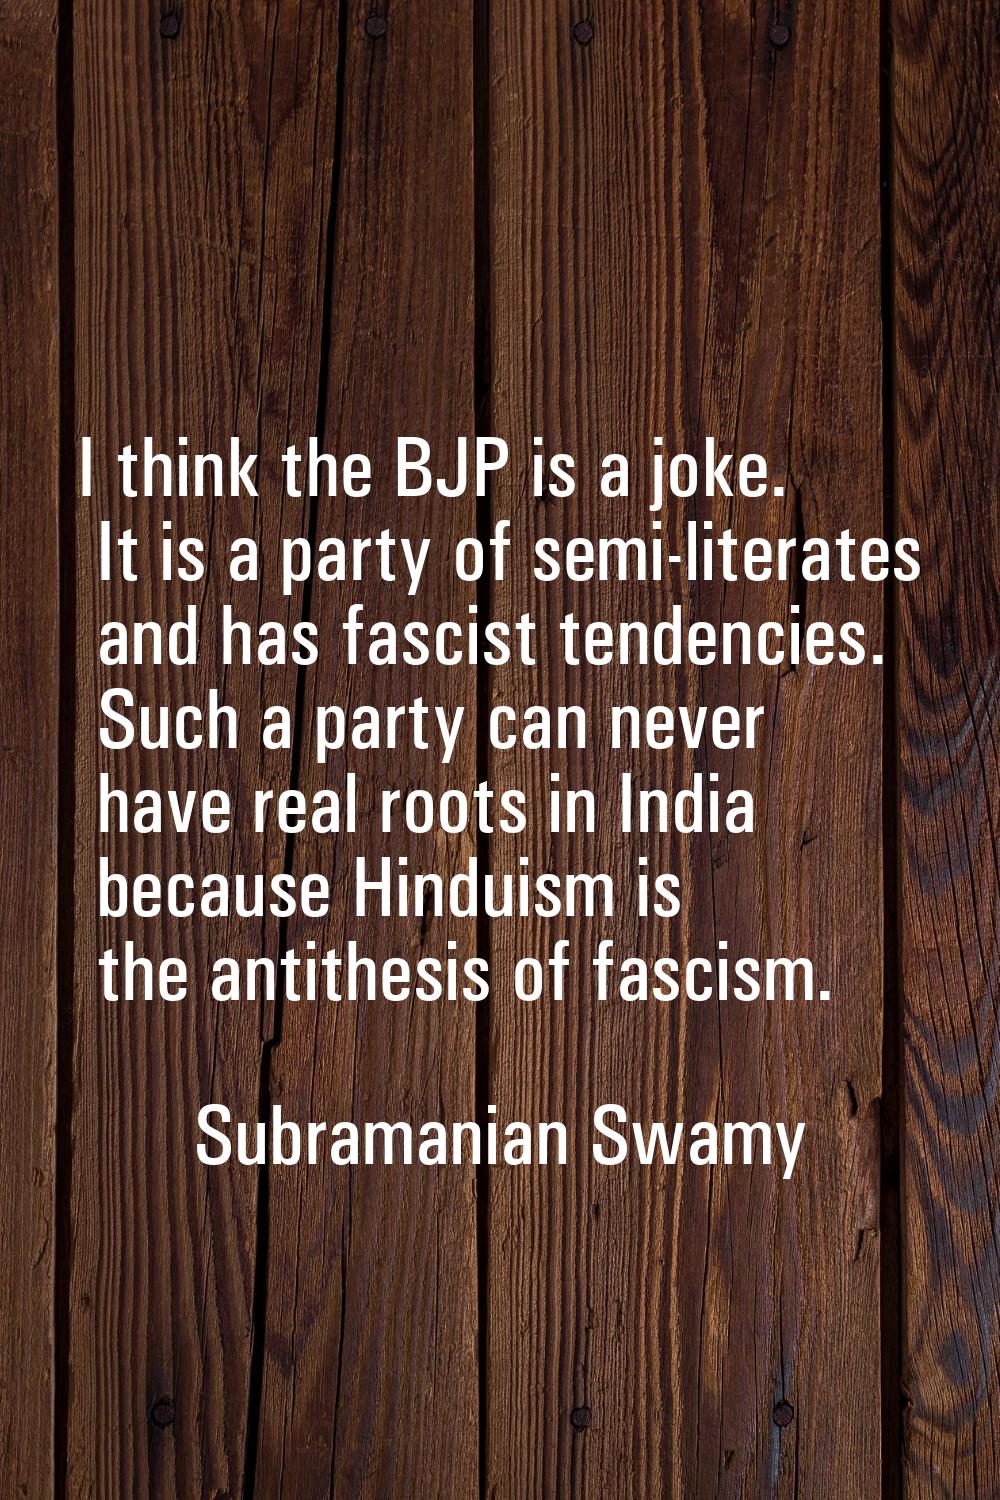 I think the BJP is a joke. It is a party of semi-literates and has fascist tendencies. Such a party